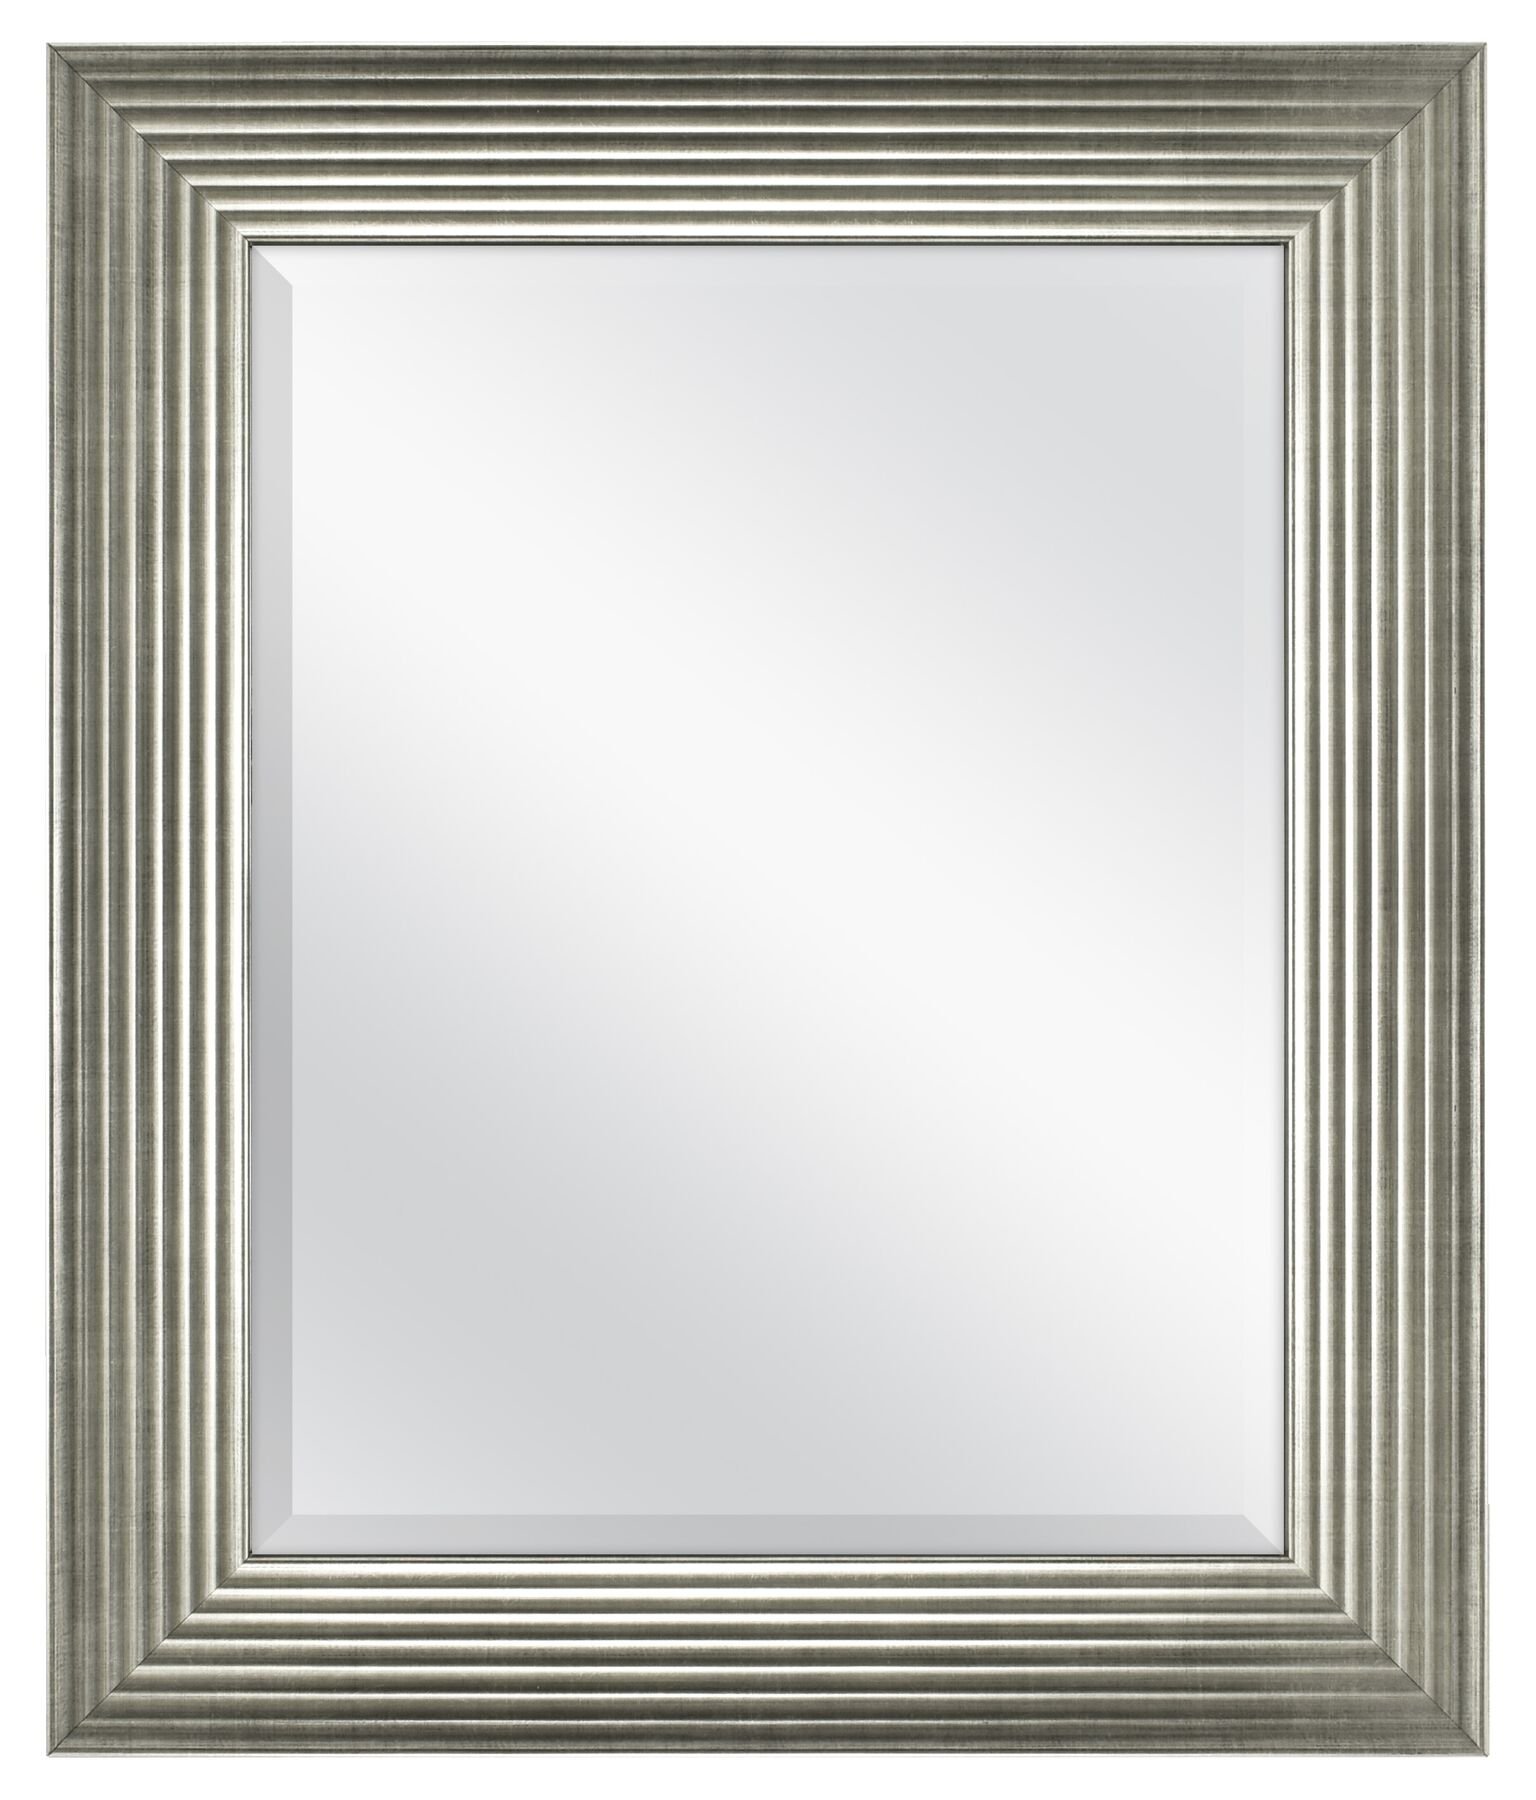 MCS 16x20 Inch Summit, 21.5x25.5 Overall Size, Silver Mirror